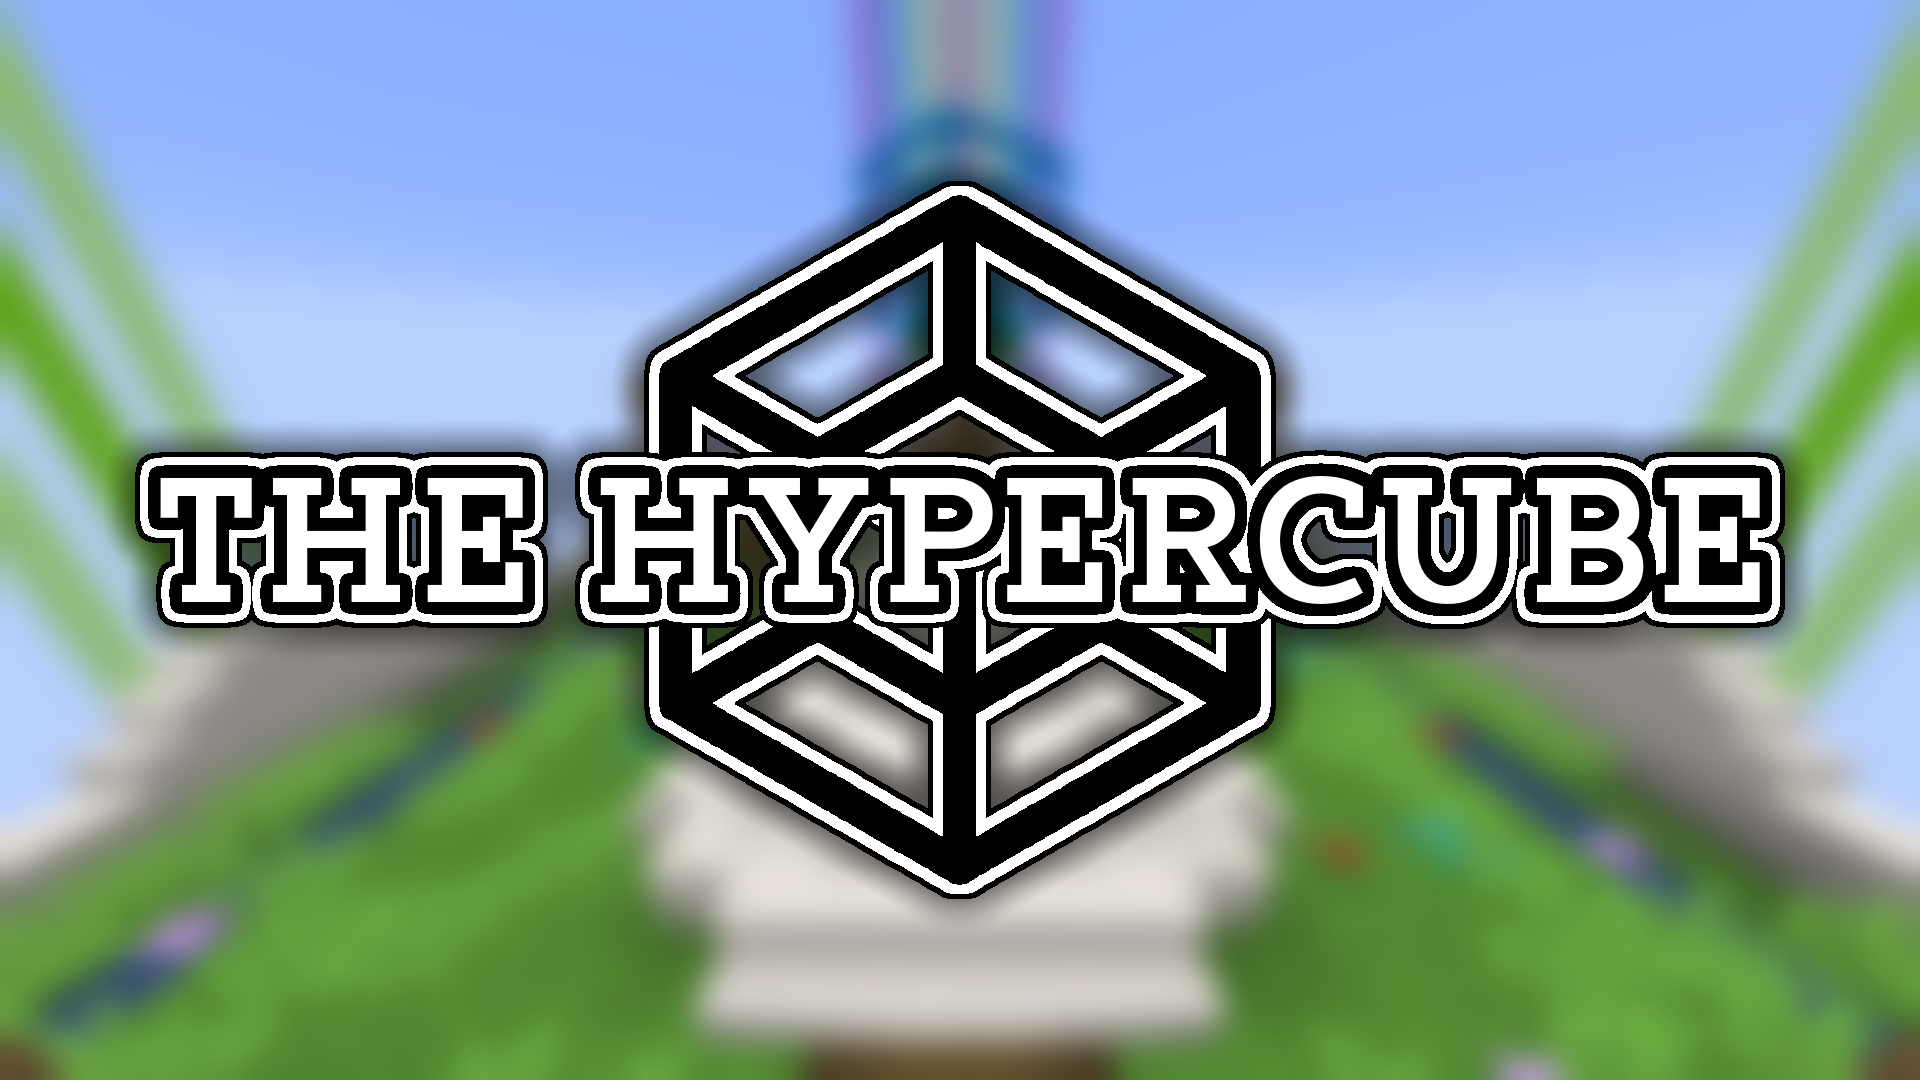 Download The Hypercube for Minecraft 1.14